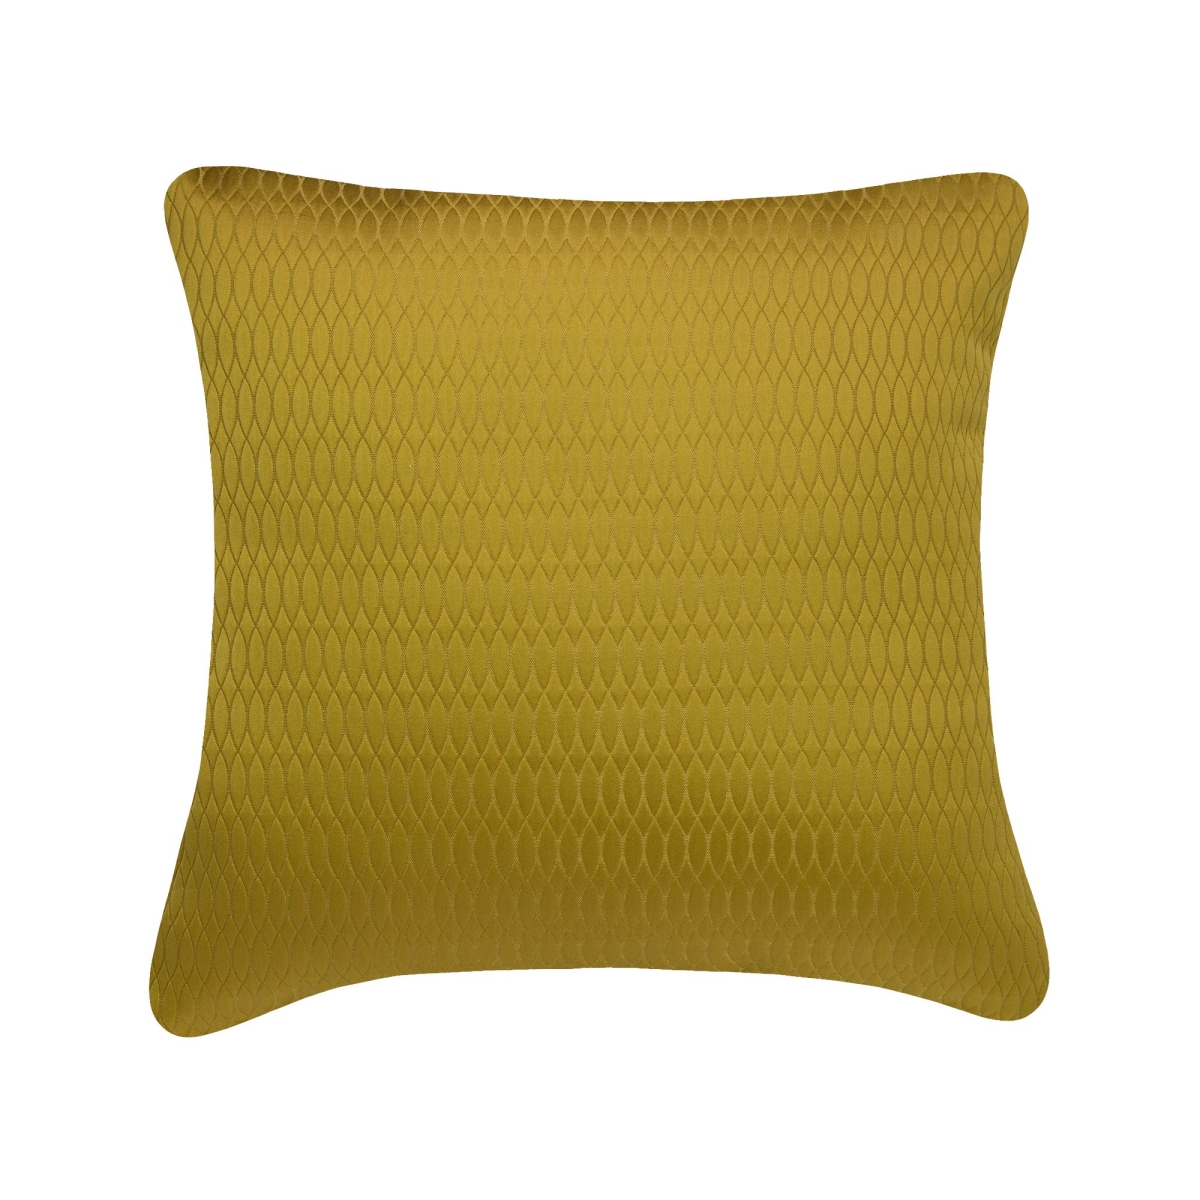 18 X 18 In. Biscay Euro Decorative Cushion, Gold - 100 Percent Duck Feather